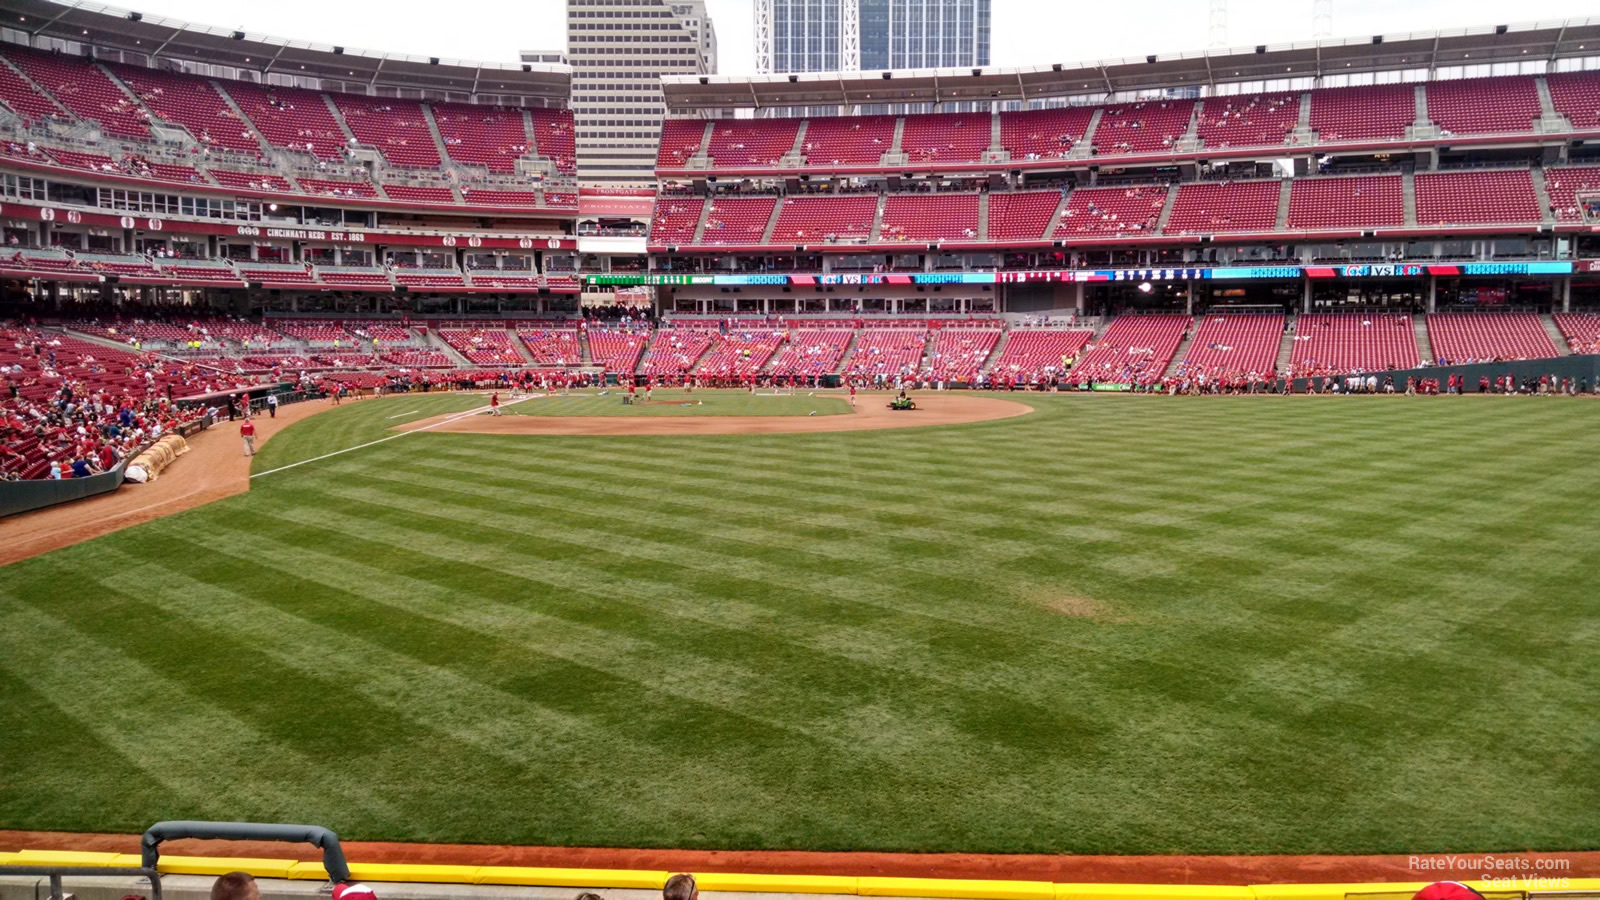 Section 416 at Great American Ball Park 